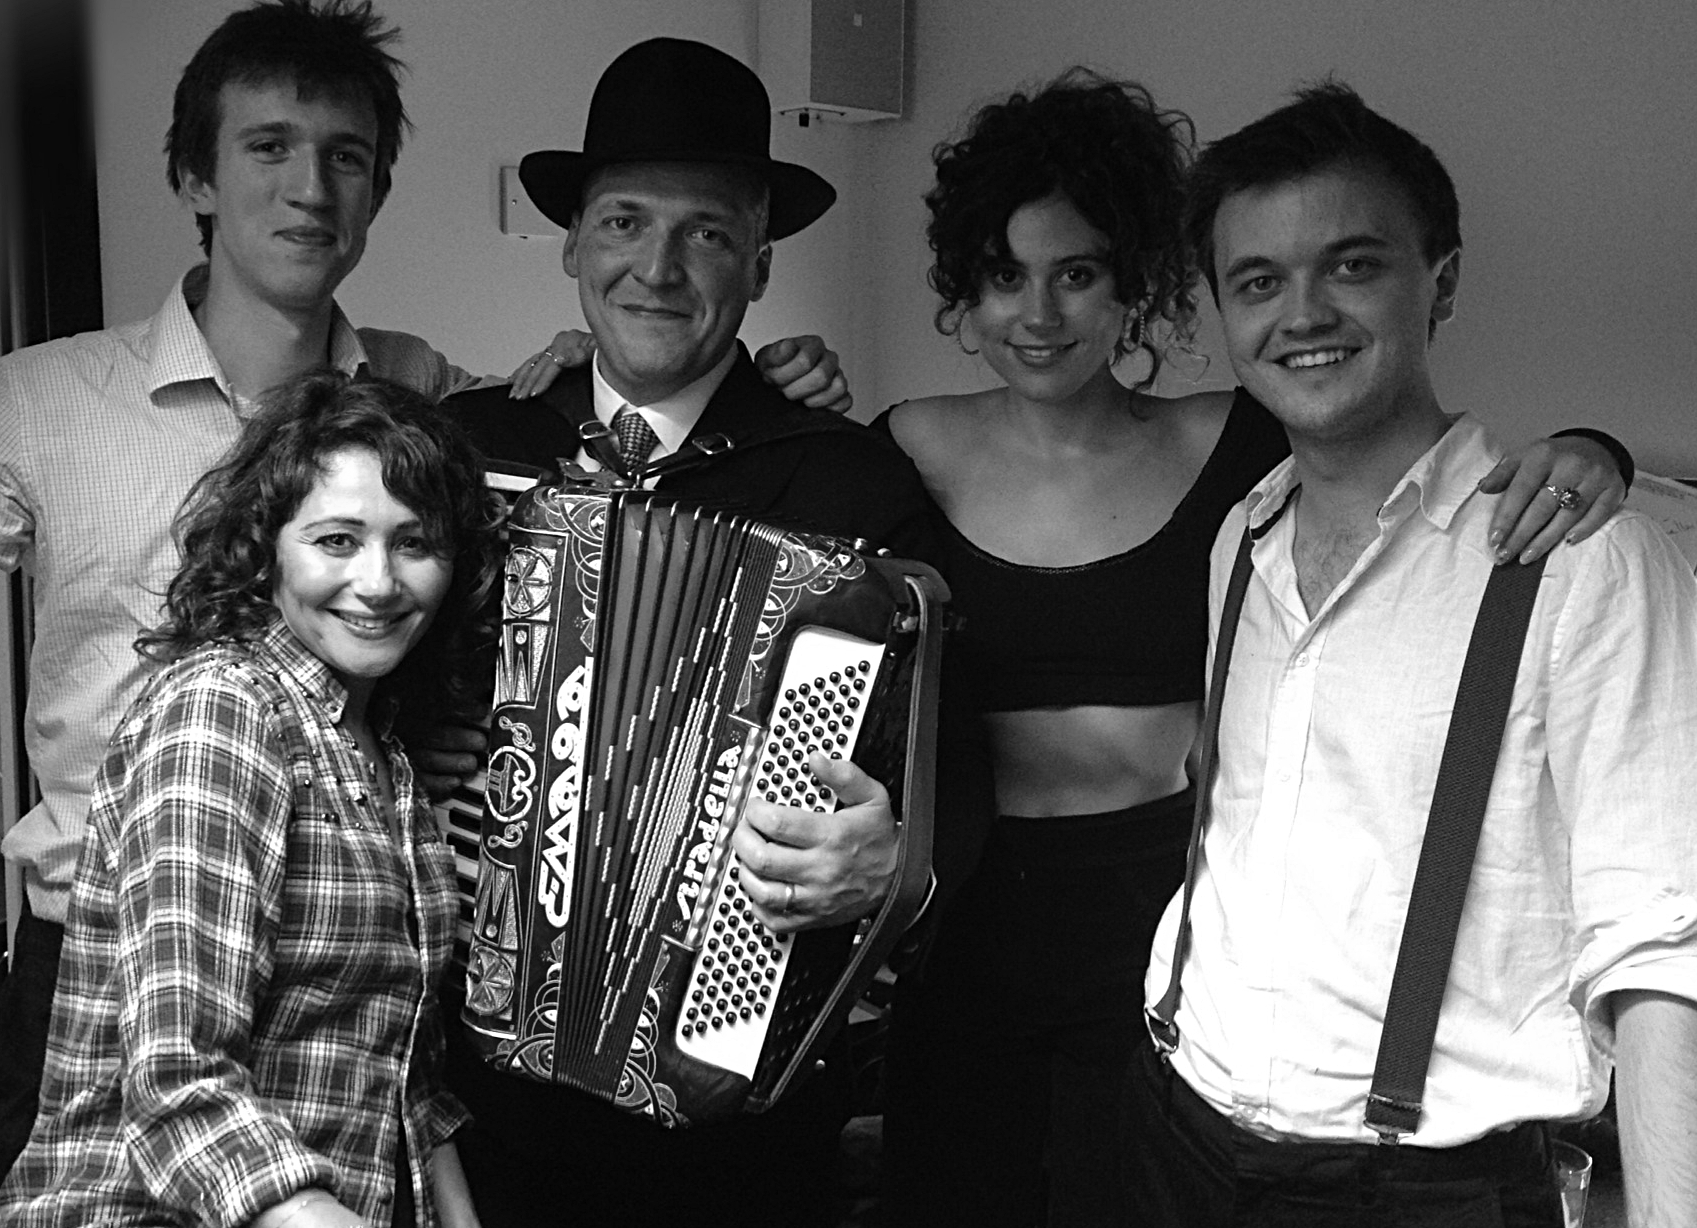 Pre-final show at The St James Theatre (or Other Palace): Misha Mullov-Abbado (bass), Frances Ruffelle, Romano Viazzani (accordion), Eliza Caird and Jude Obermüller